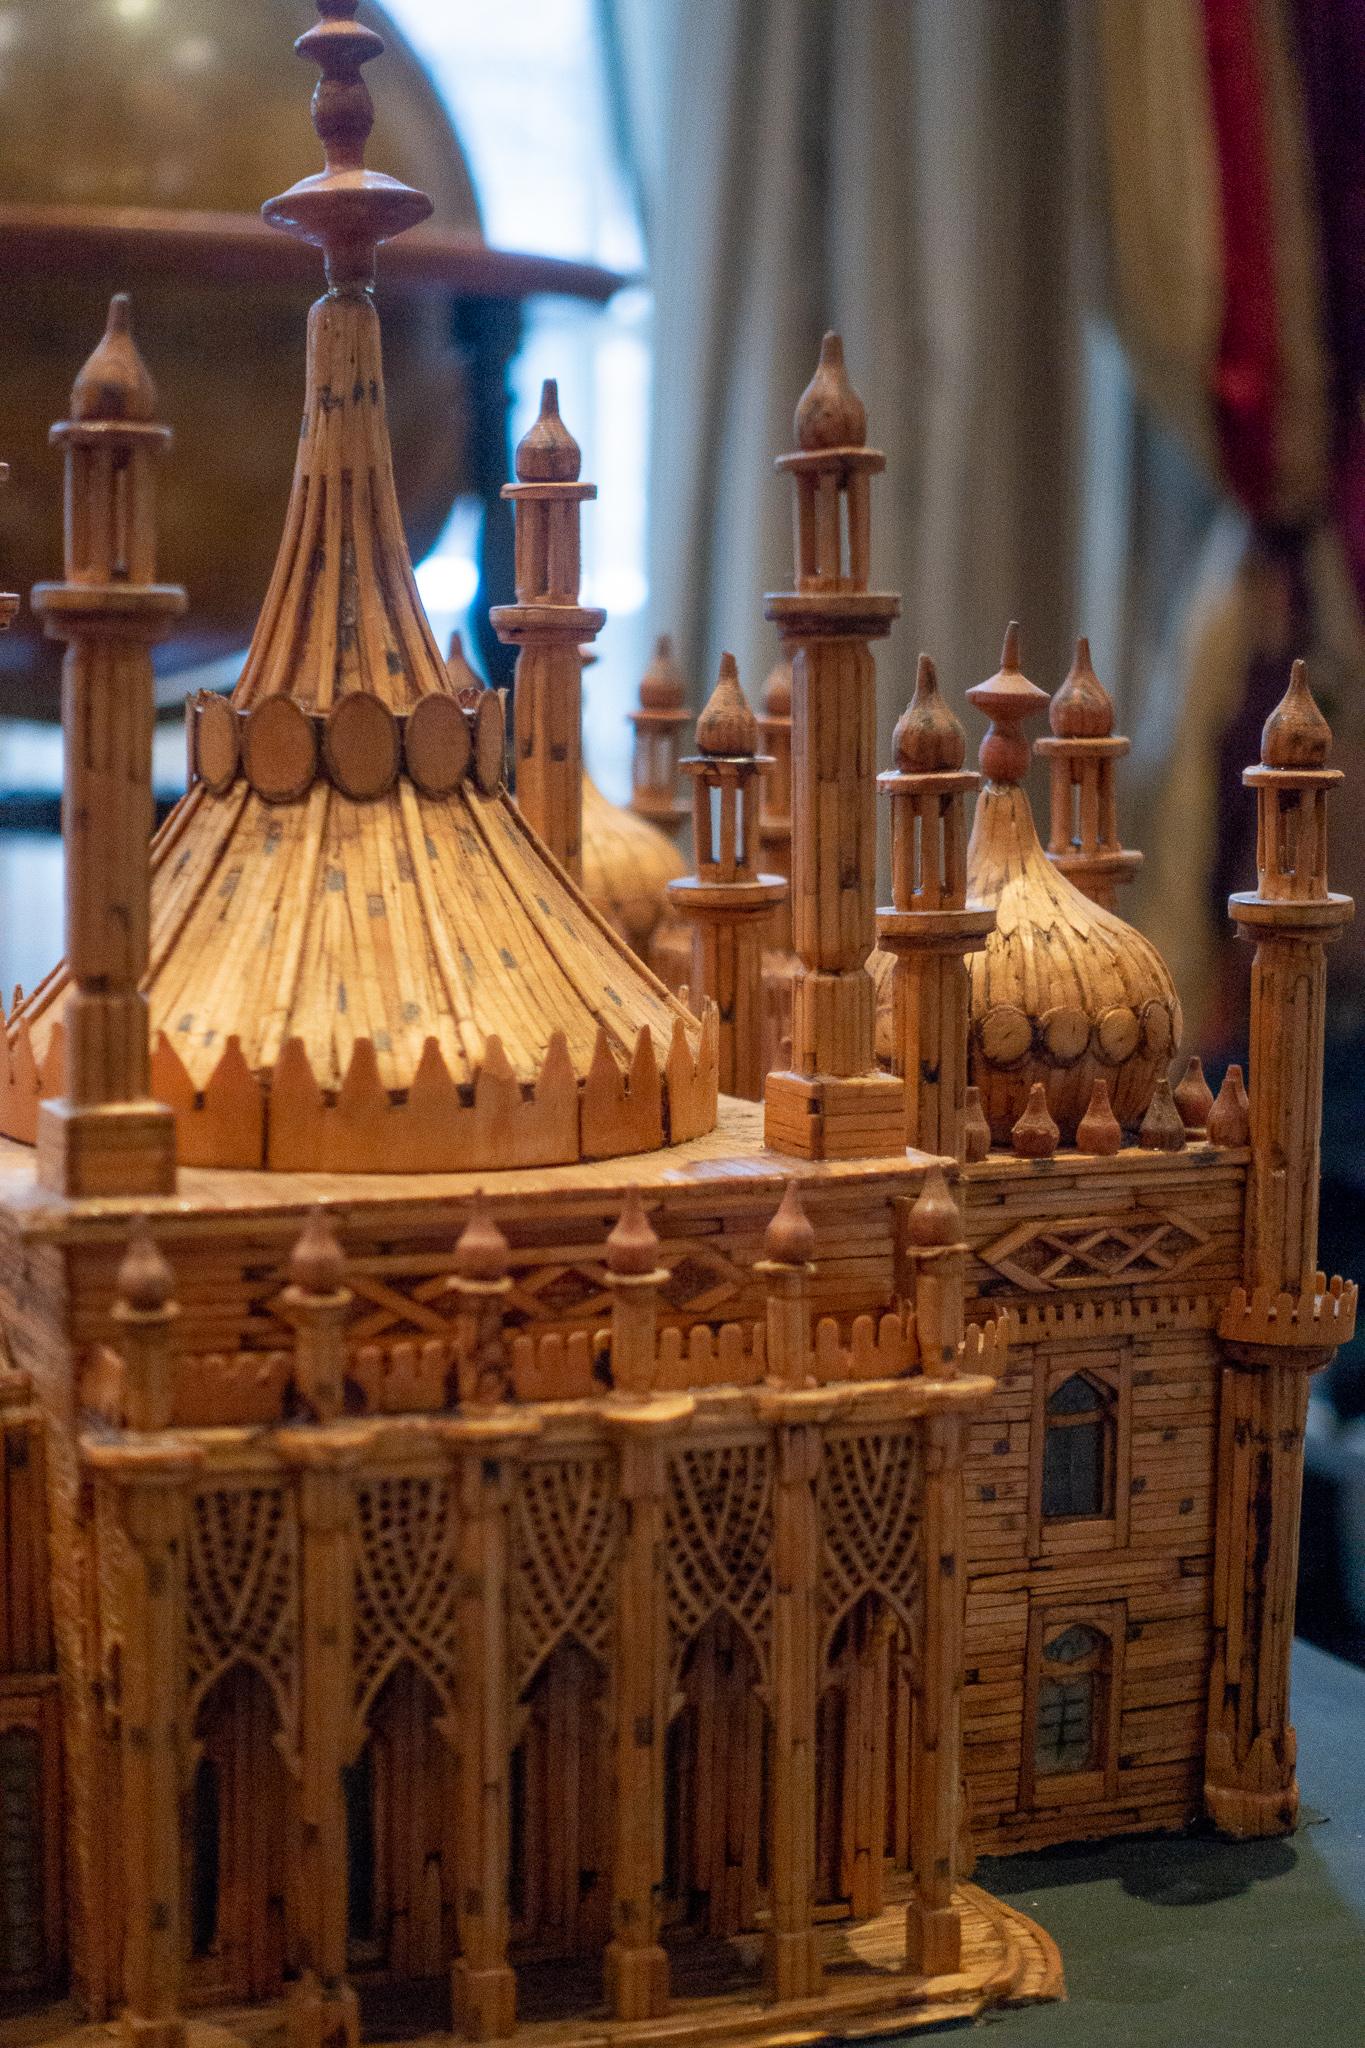 Glass Royal Brighton Pavilion Matchstick Architectural Model by Bernard Martell For Sale